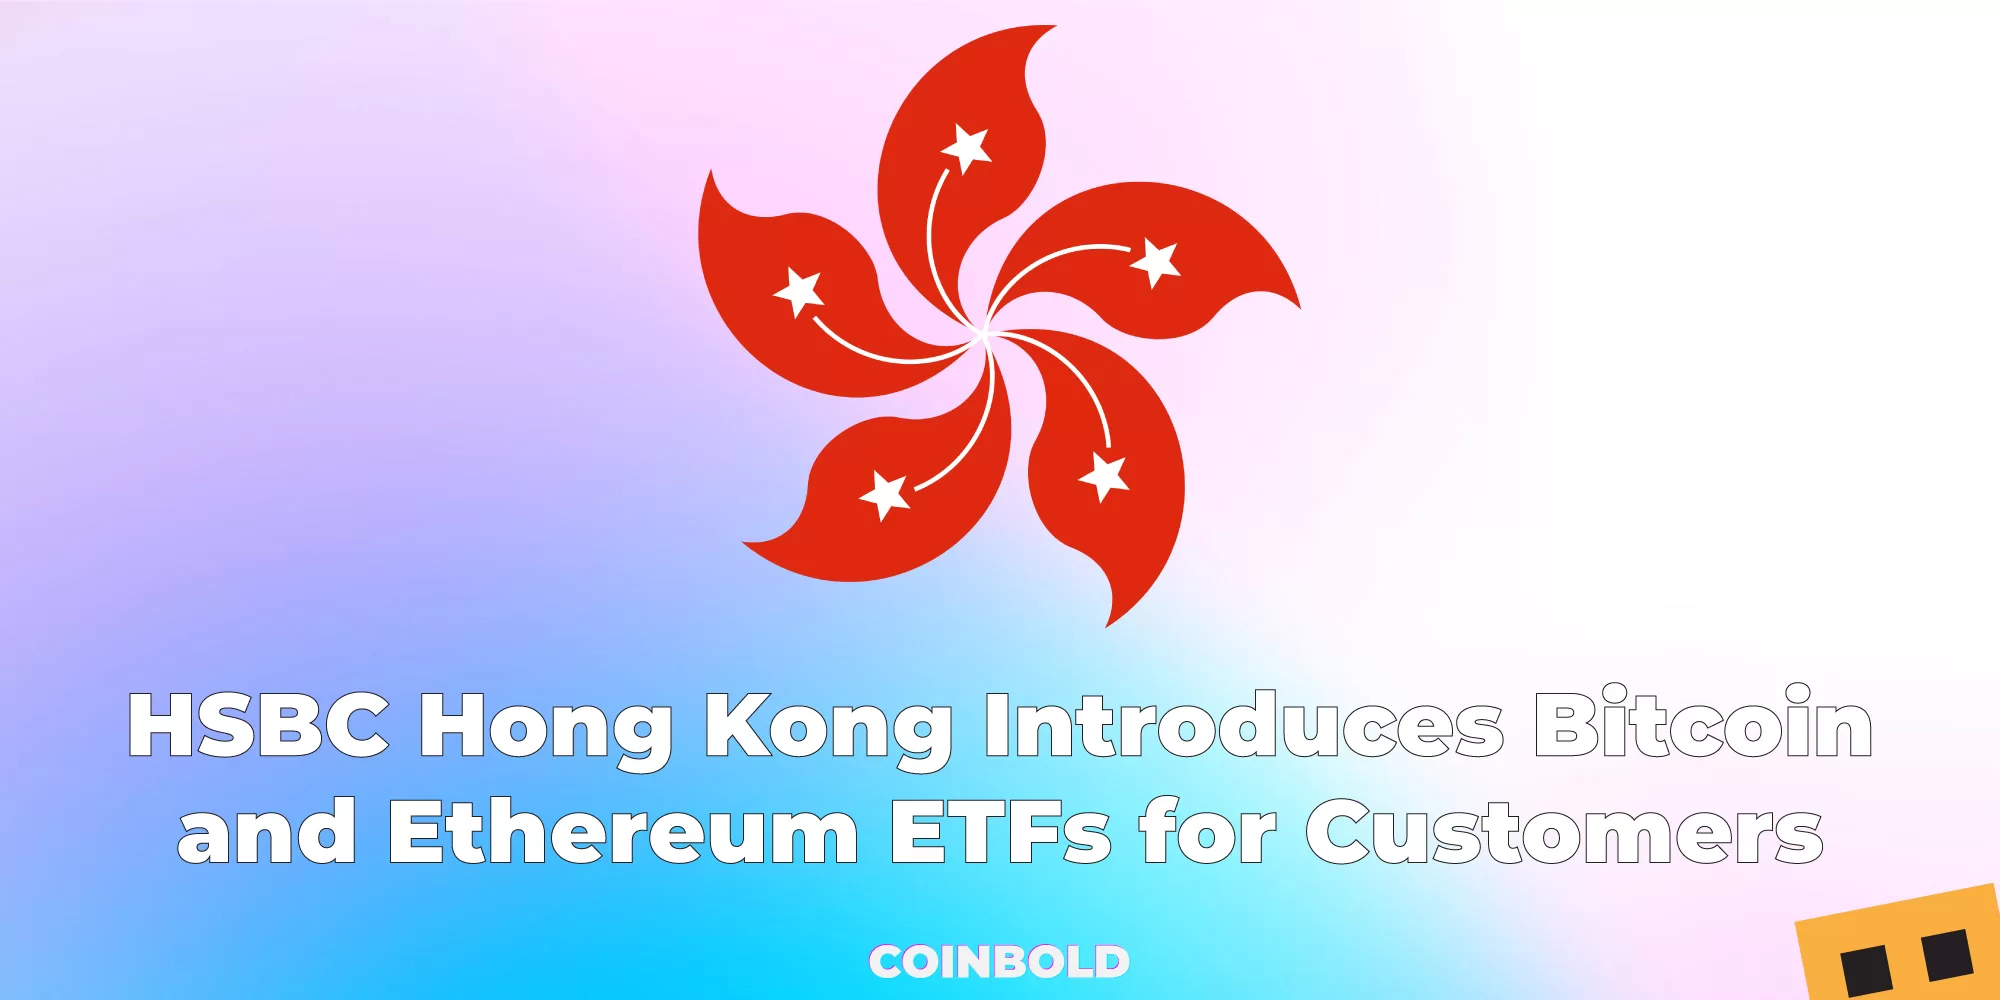 HSBC Hong Kong Introduces Bitcoin and Ethereum ETFs for Customers